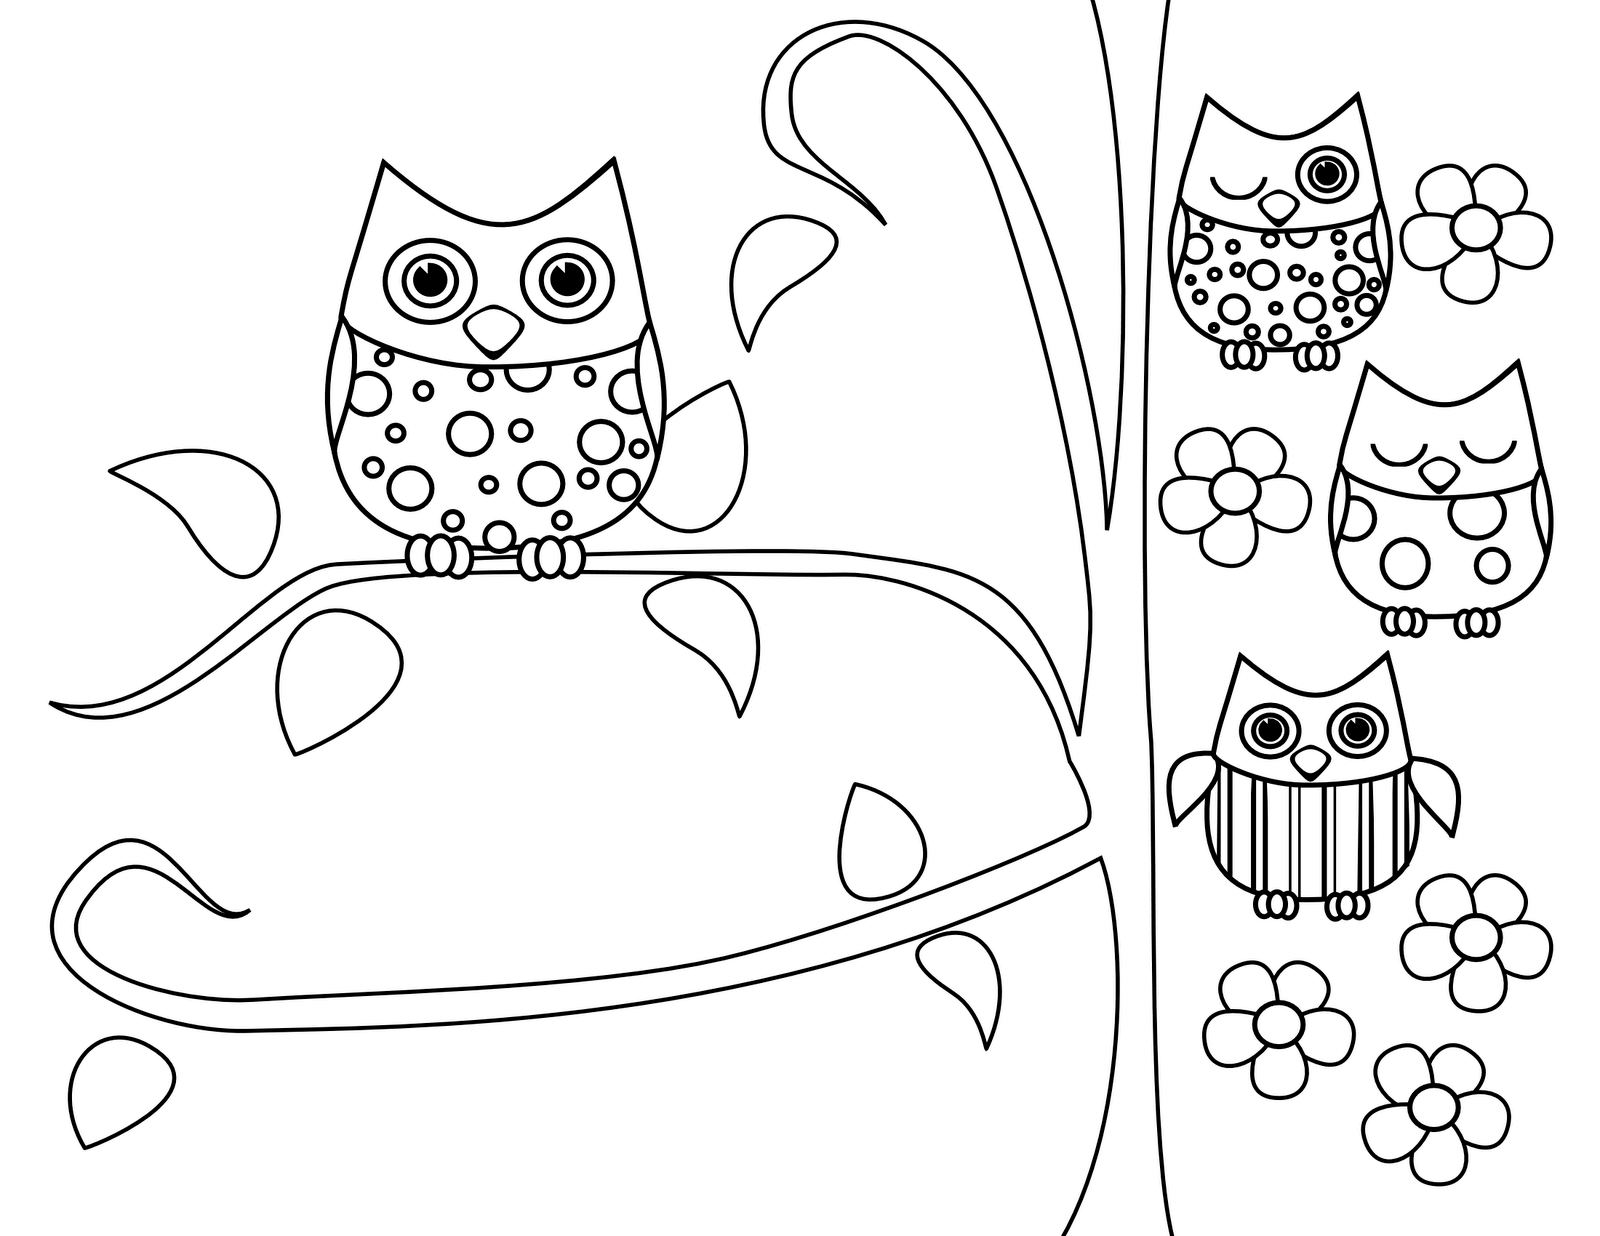 Fun Owls Coloring Pages